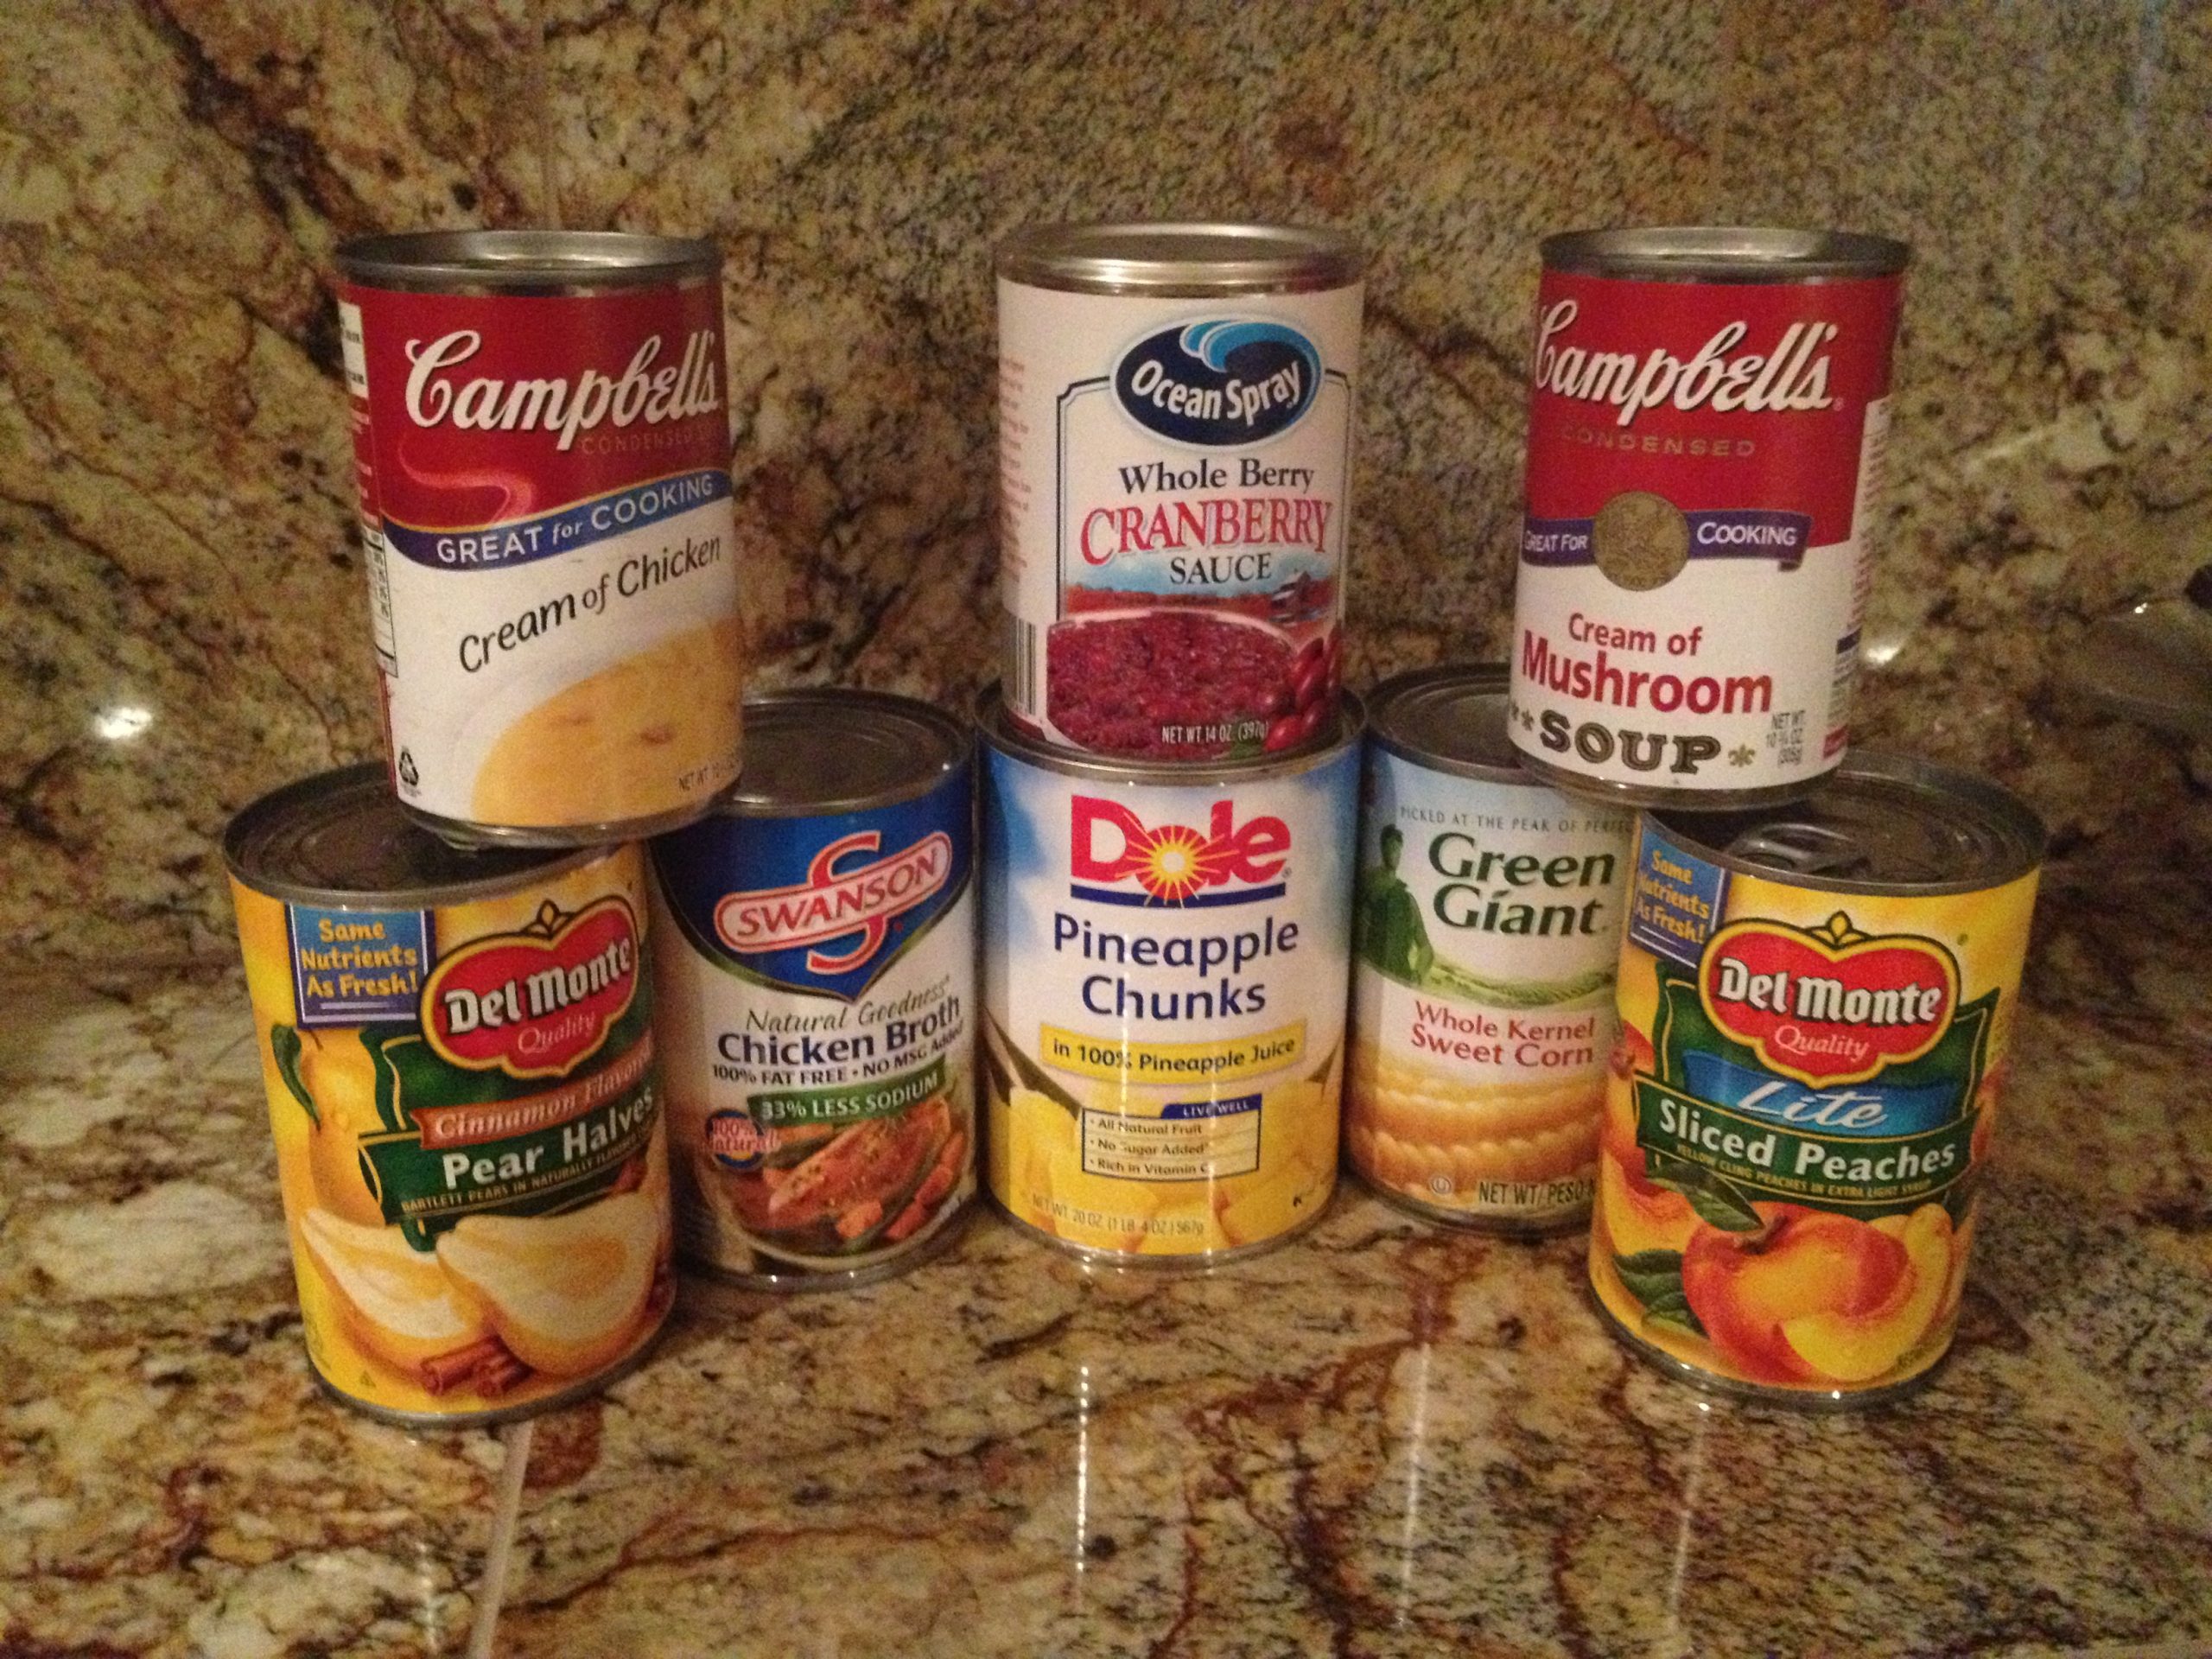 Ideas for canned goods prepping at Thanksgiving